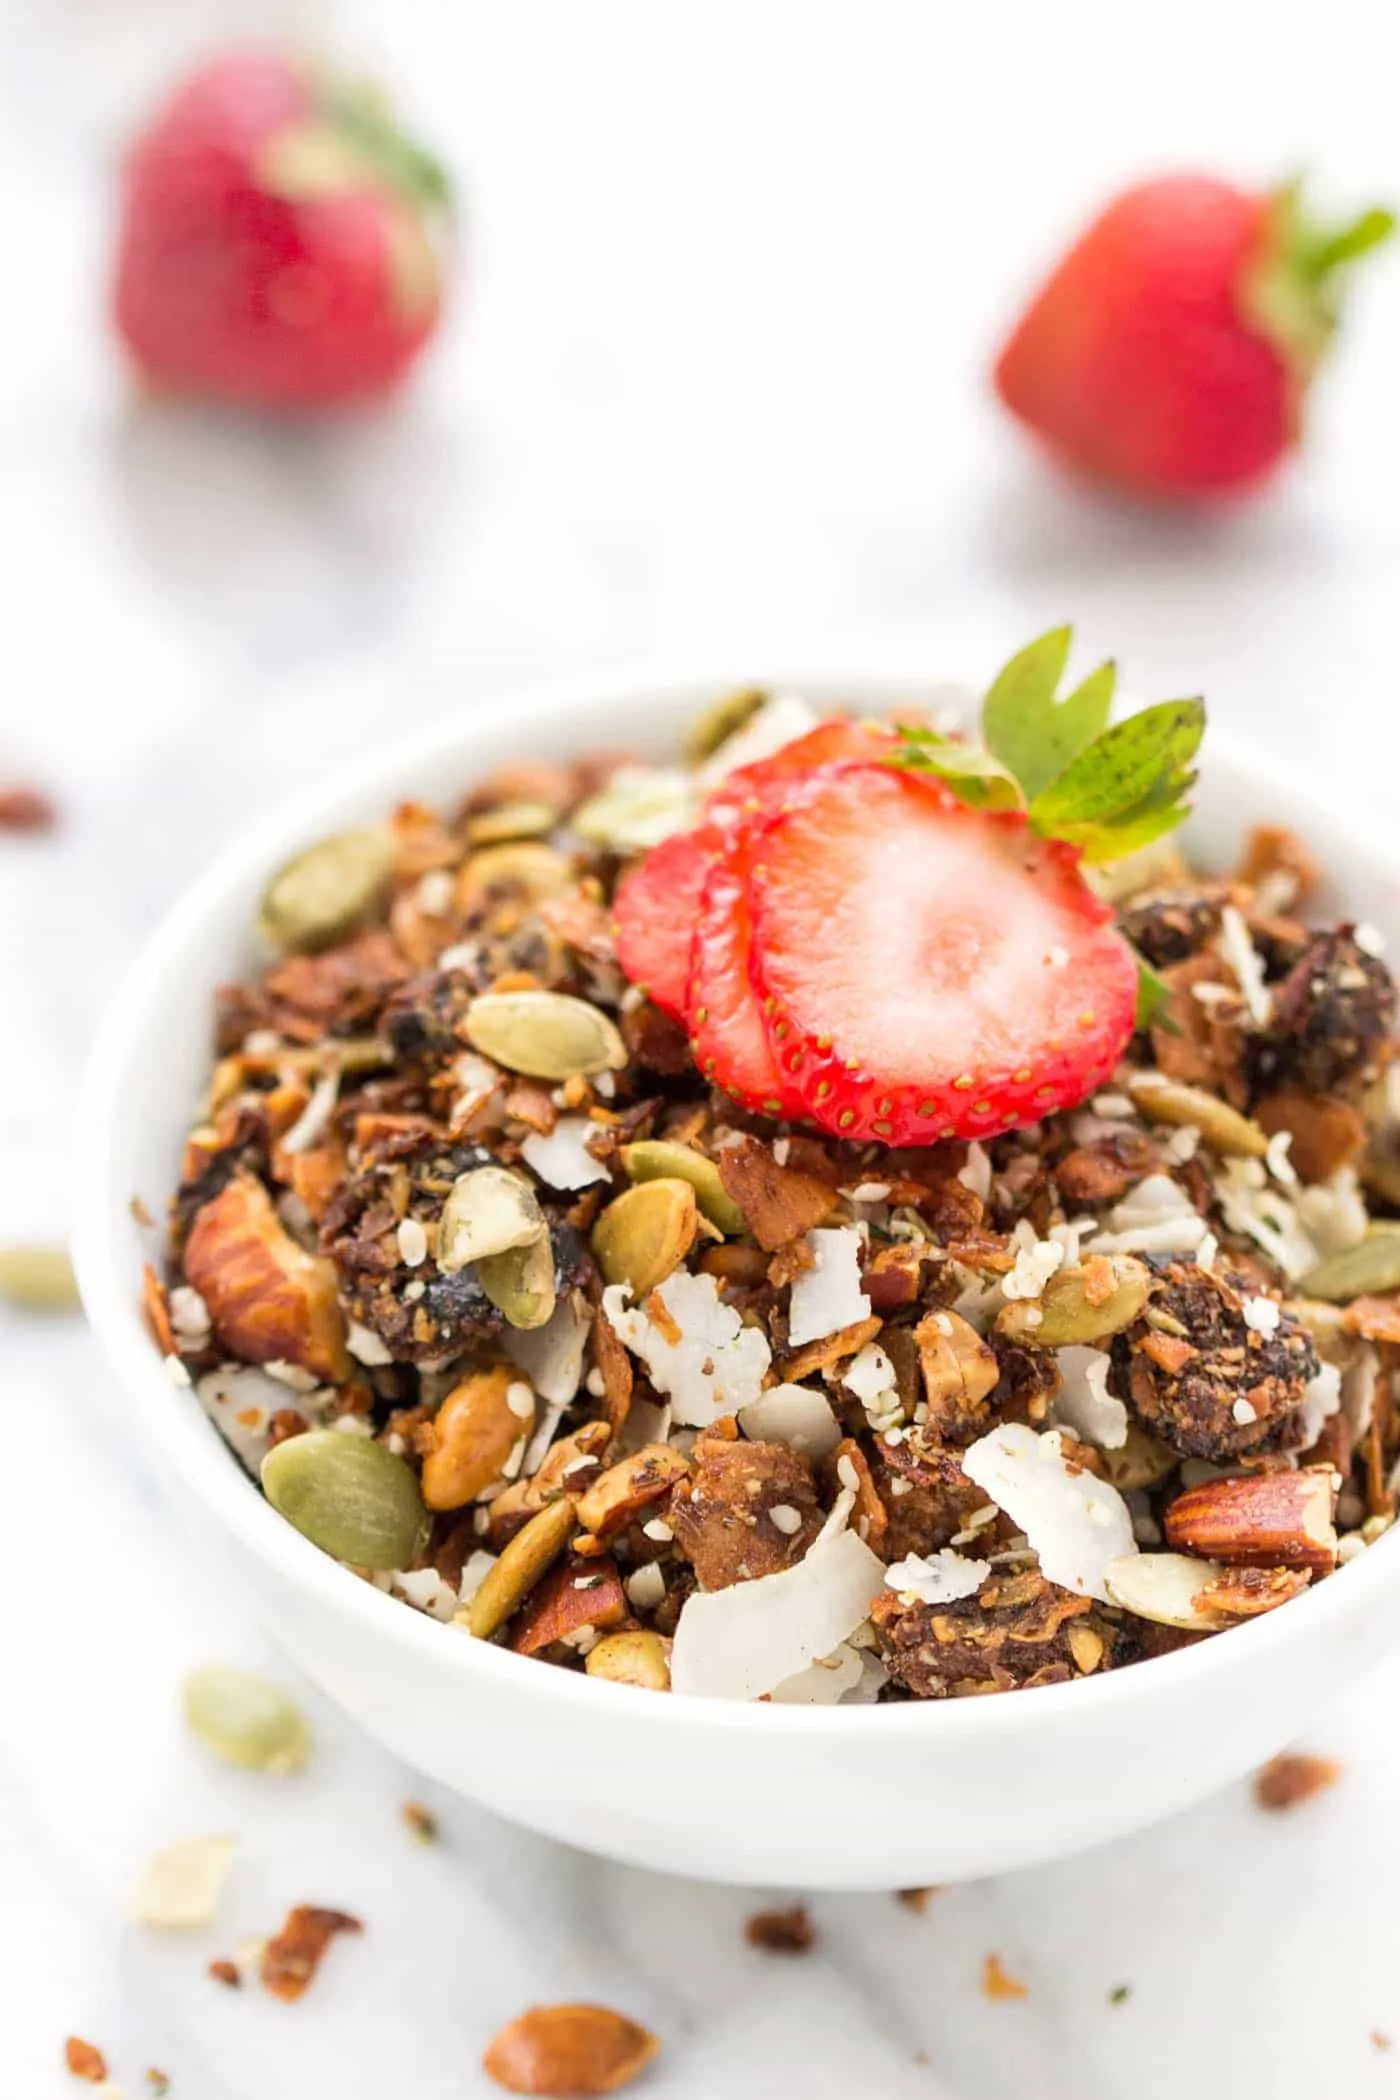 This delicious Coconut Granola is not only vegan, but it's also grain-free AND paleo!